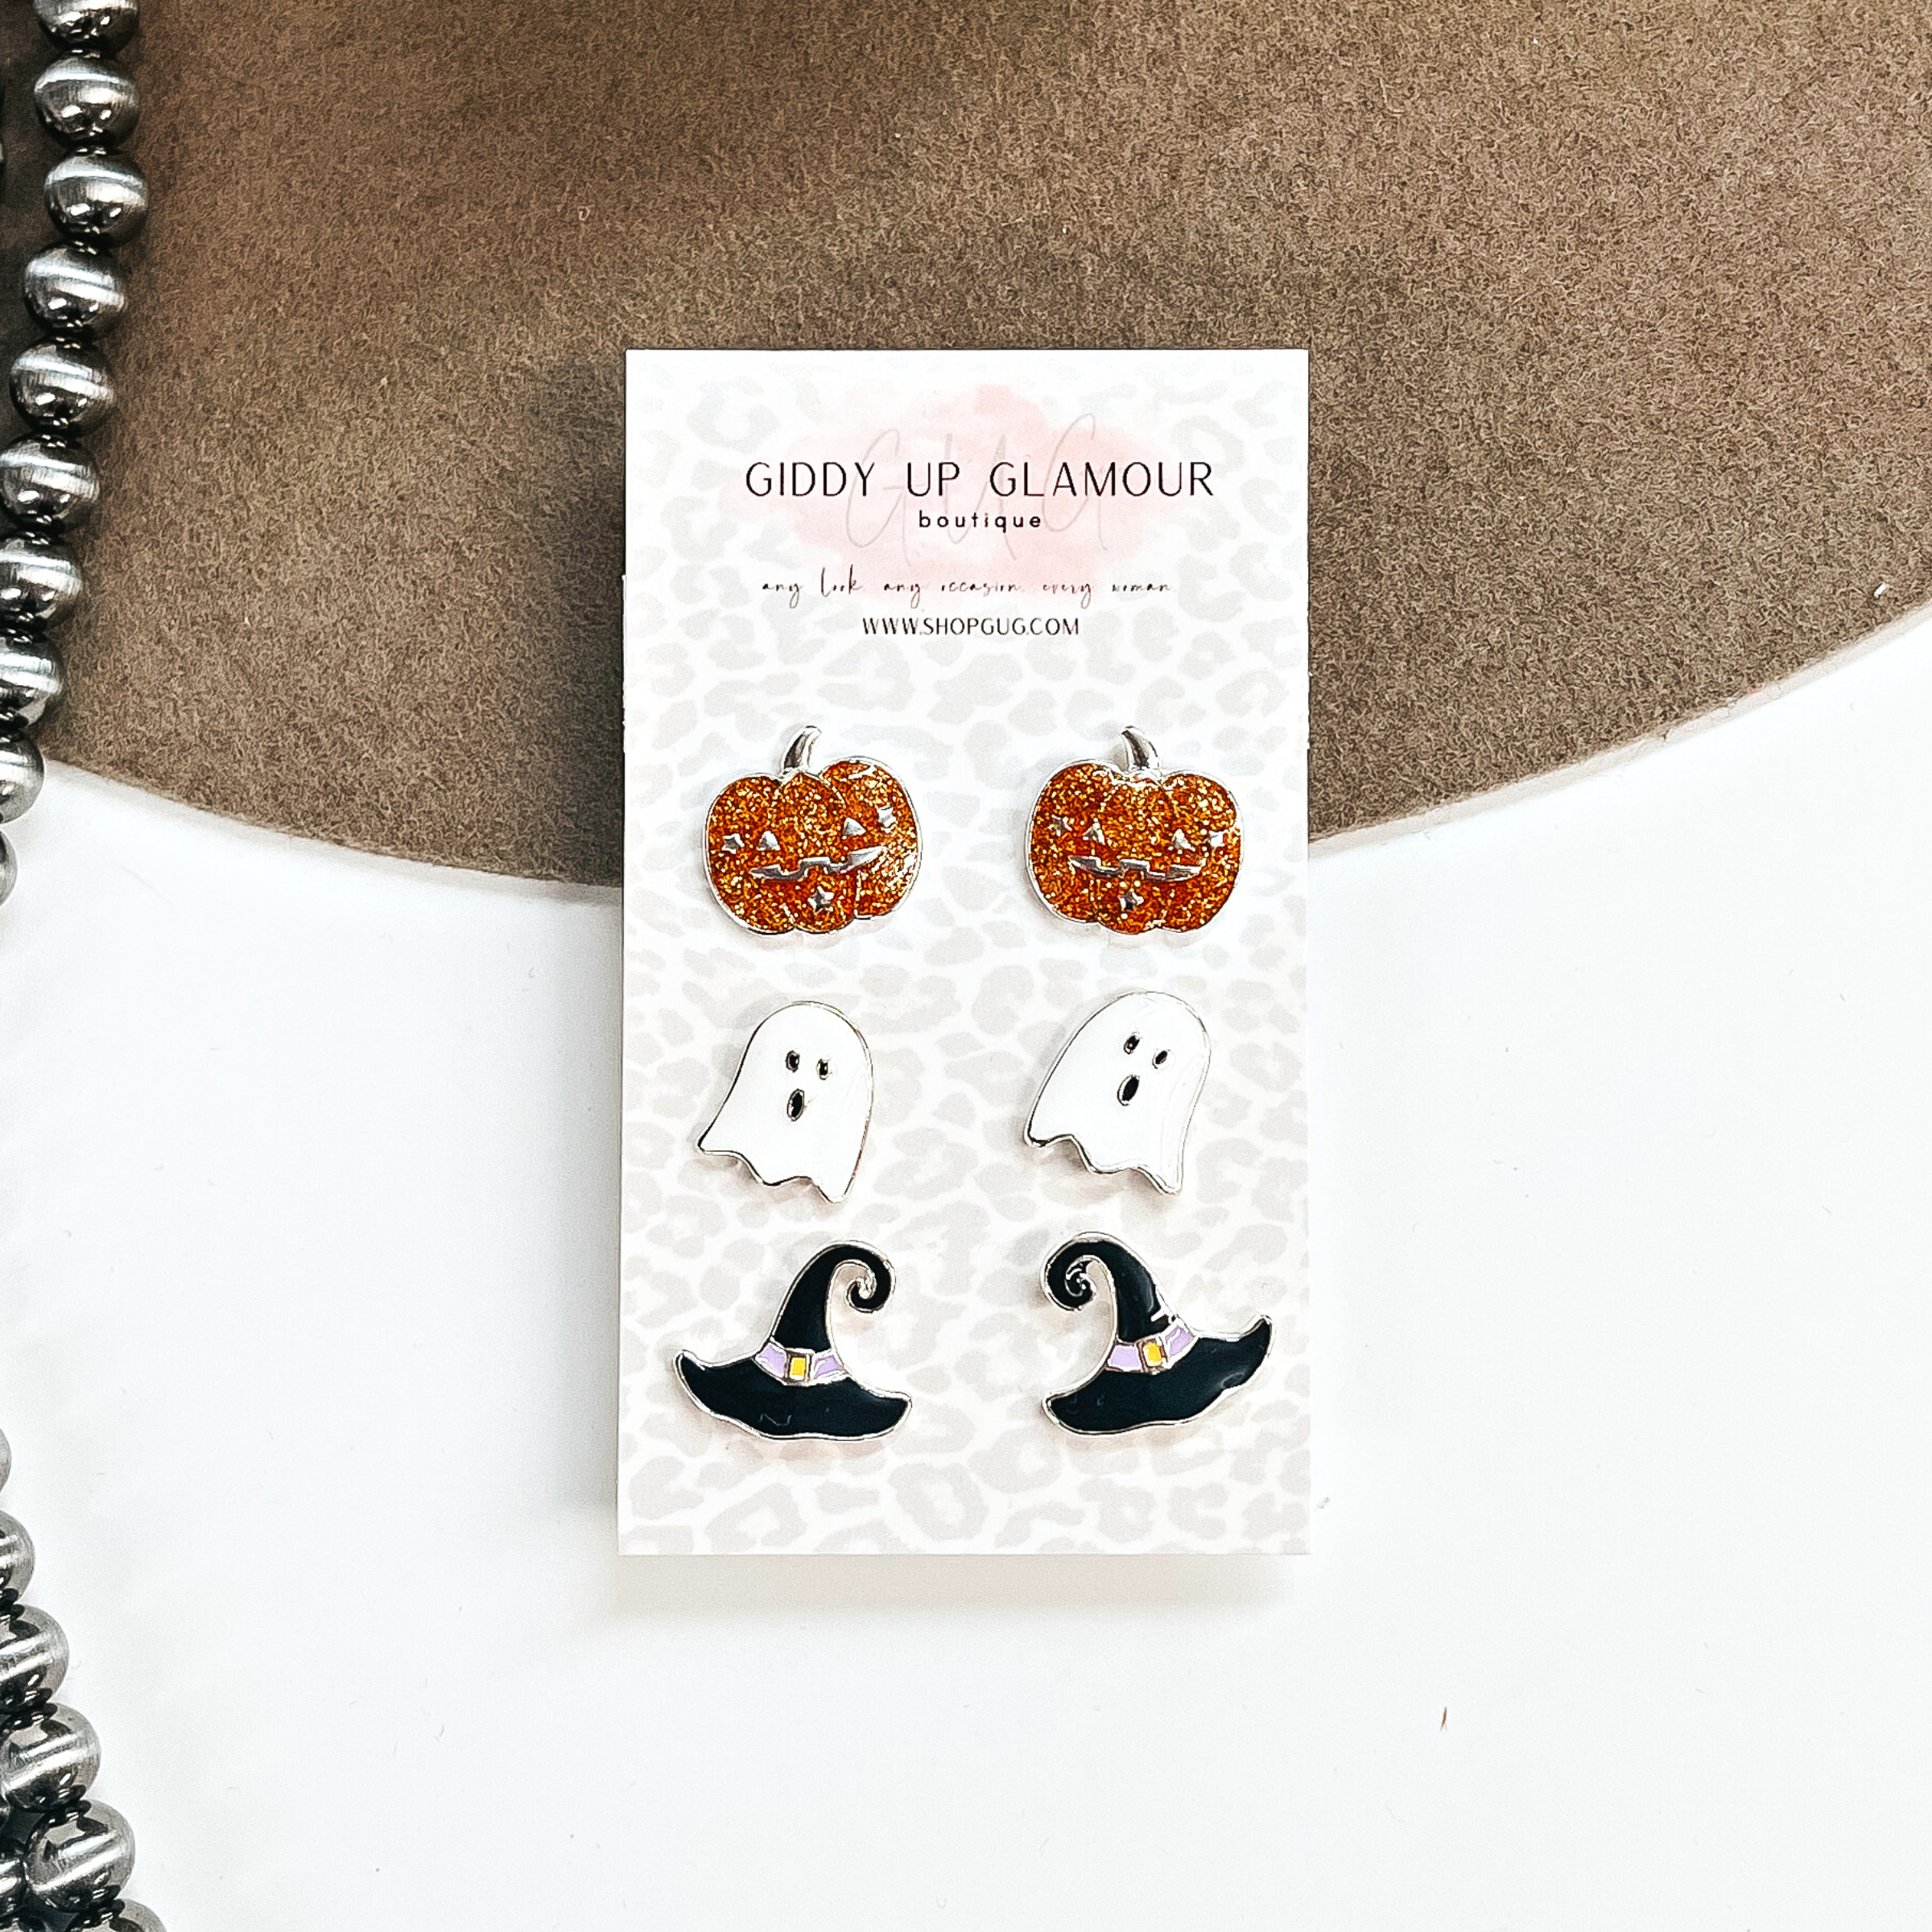 This is a set of three stud earrings with Halloween charms. From top to bottom; pumpkins  in orange glitter in a silver setting, white ghost with a black eyes and mouth in a  silver setting, and black witch hat's with a purple band in a silver setting. These  earrings are places on a Giddy Up Glamour card, they are taken on a brown hat brim  and white background with silver Navajo beads in the side as decor.